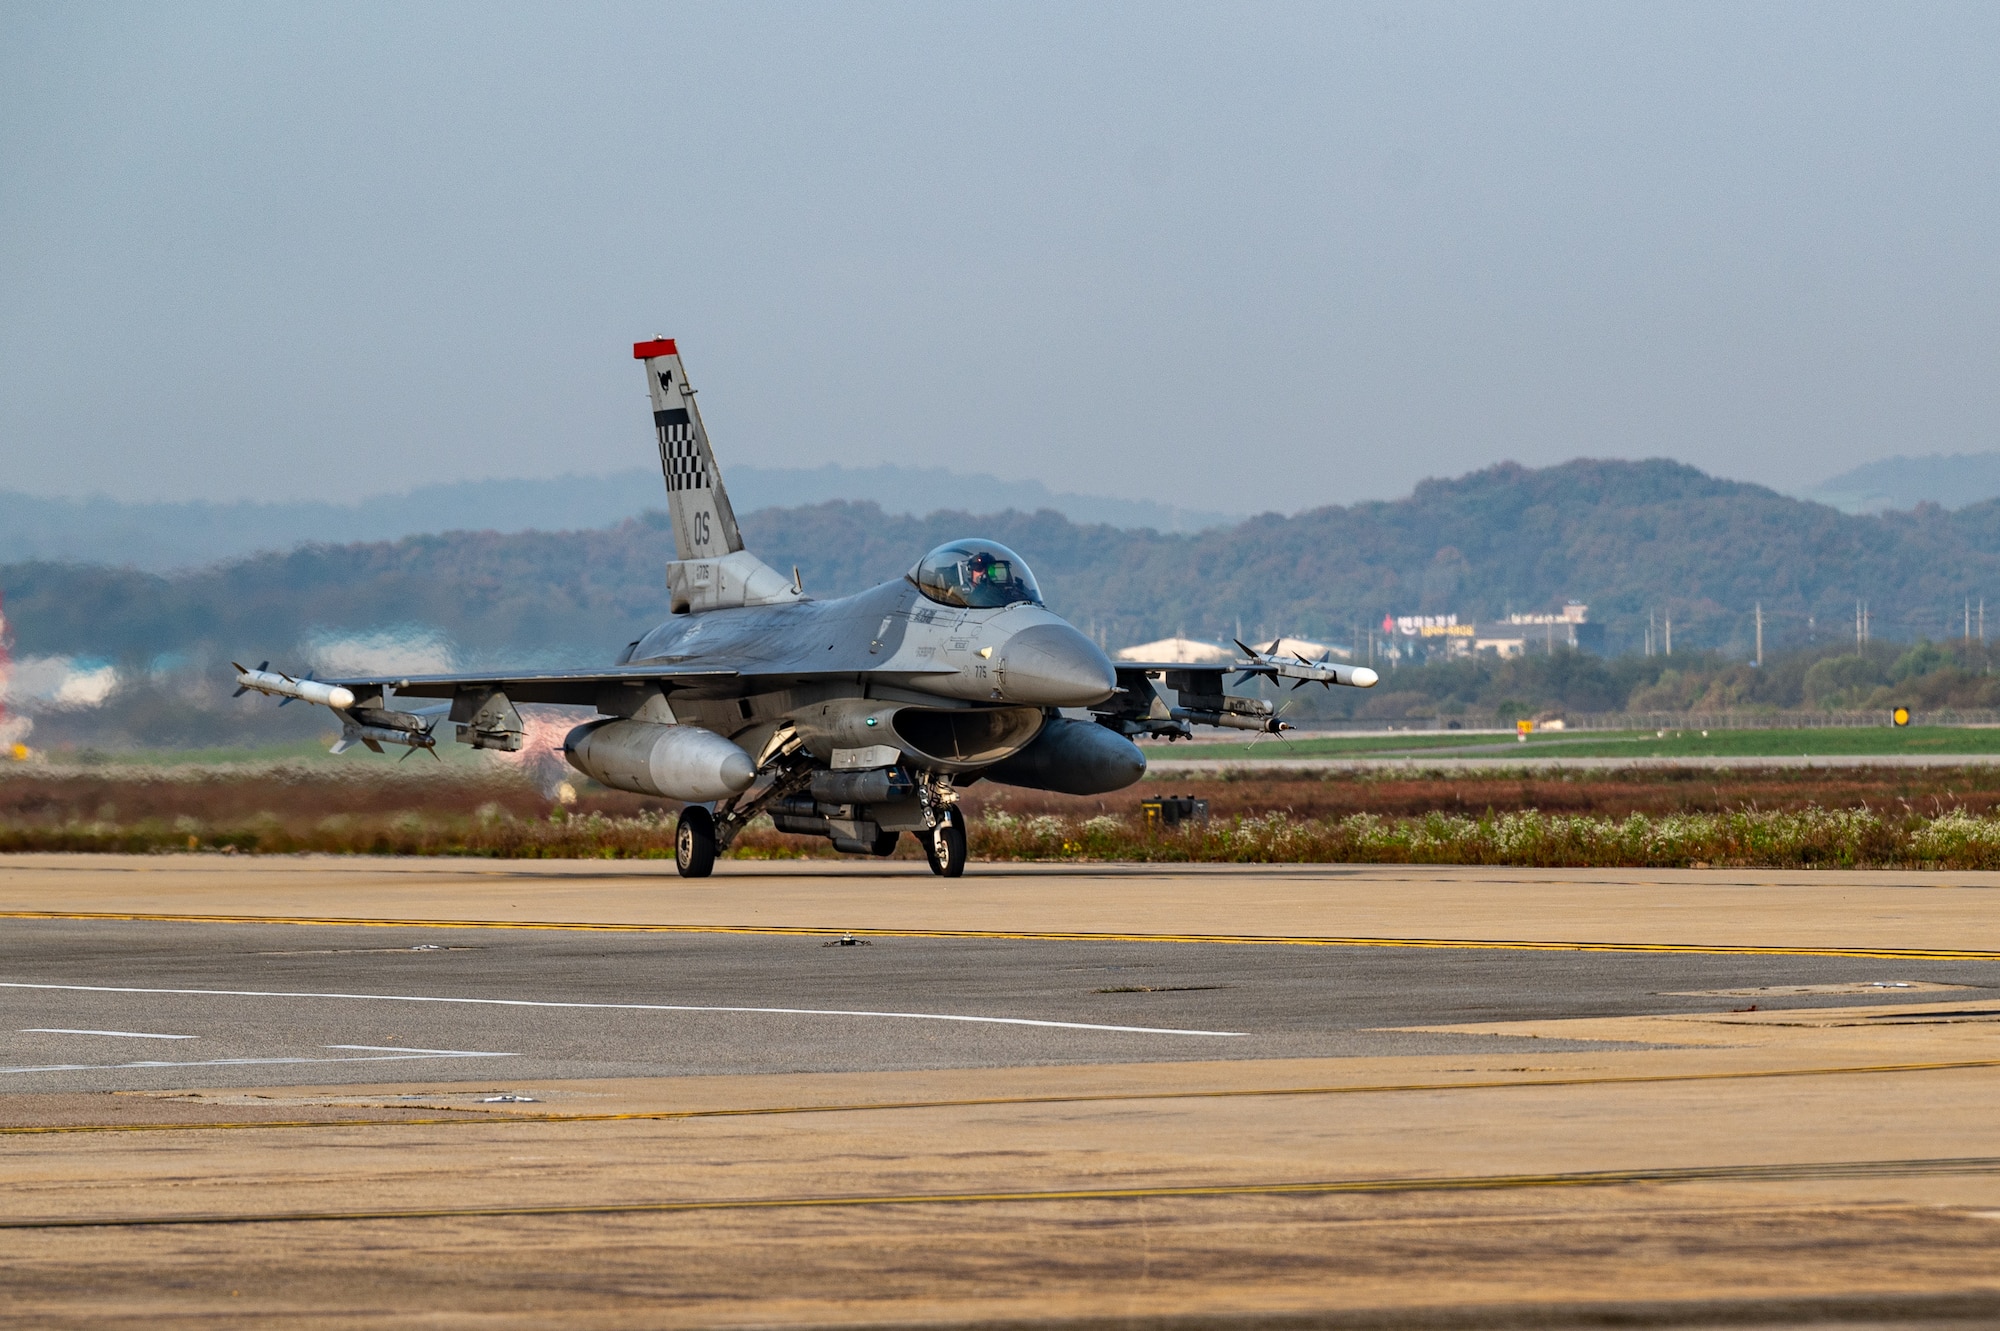 231030-F-QO603-1240
A U.S. Air Force F-16 Fighting Falcon taxis down an alternate landing strip during Vigilant Defense 24 at Osan Air Base, Republic of Korea, Oct. 30, 2023. The reallocation of flightline space allows pilots to continue flying operations despite damage to the main runway. VD24 is a routine training event that tests the military capabilities across the peninsula, allowing combined and joint training at both the operational and tactical levels. Training is conducted throughout the year to generate combat airpower at a moment’s notice, affirming the commitment to the ROK remains ironclad and ensures regional stability throughout the Indo-Pacific. (U.S. Air Force photo by Staff Sgt. Thomas Sjoberg)